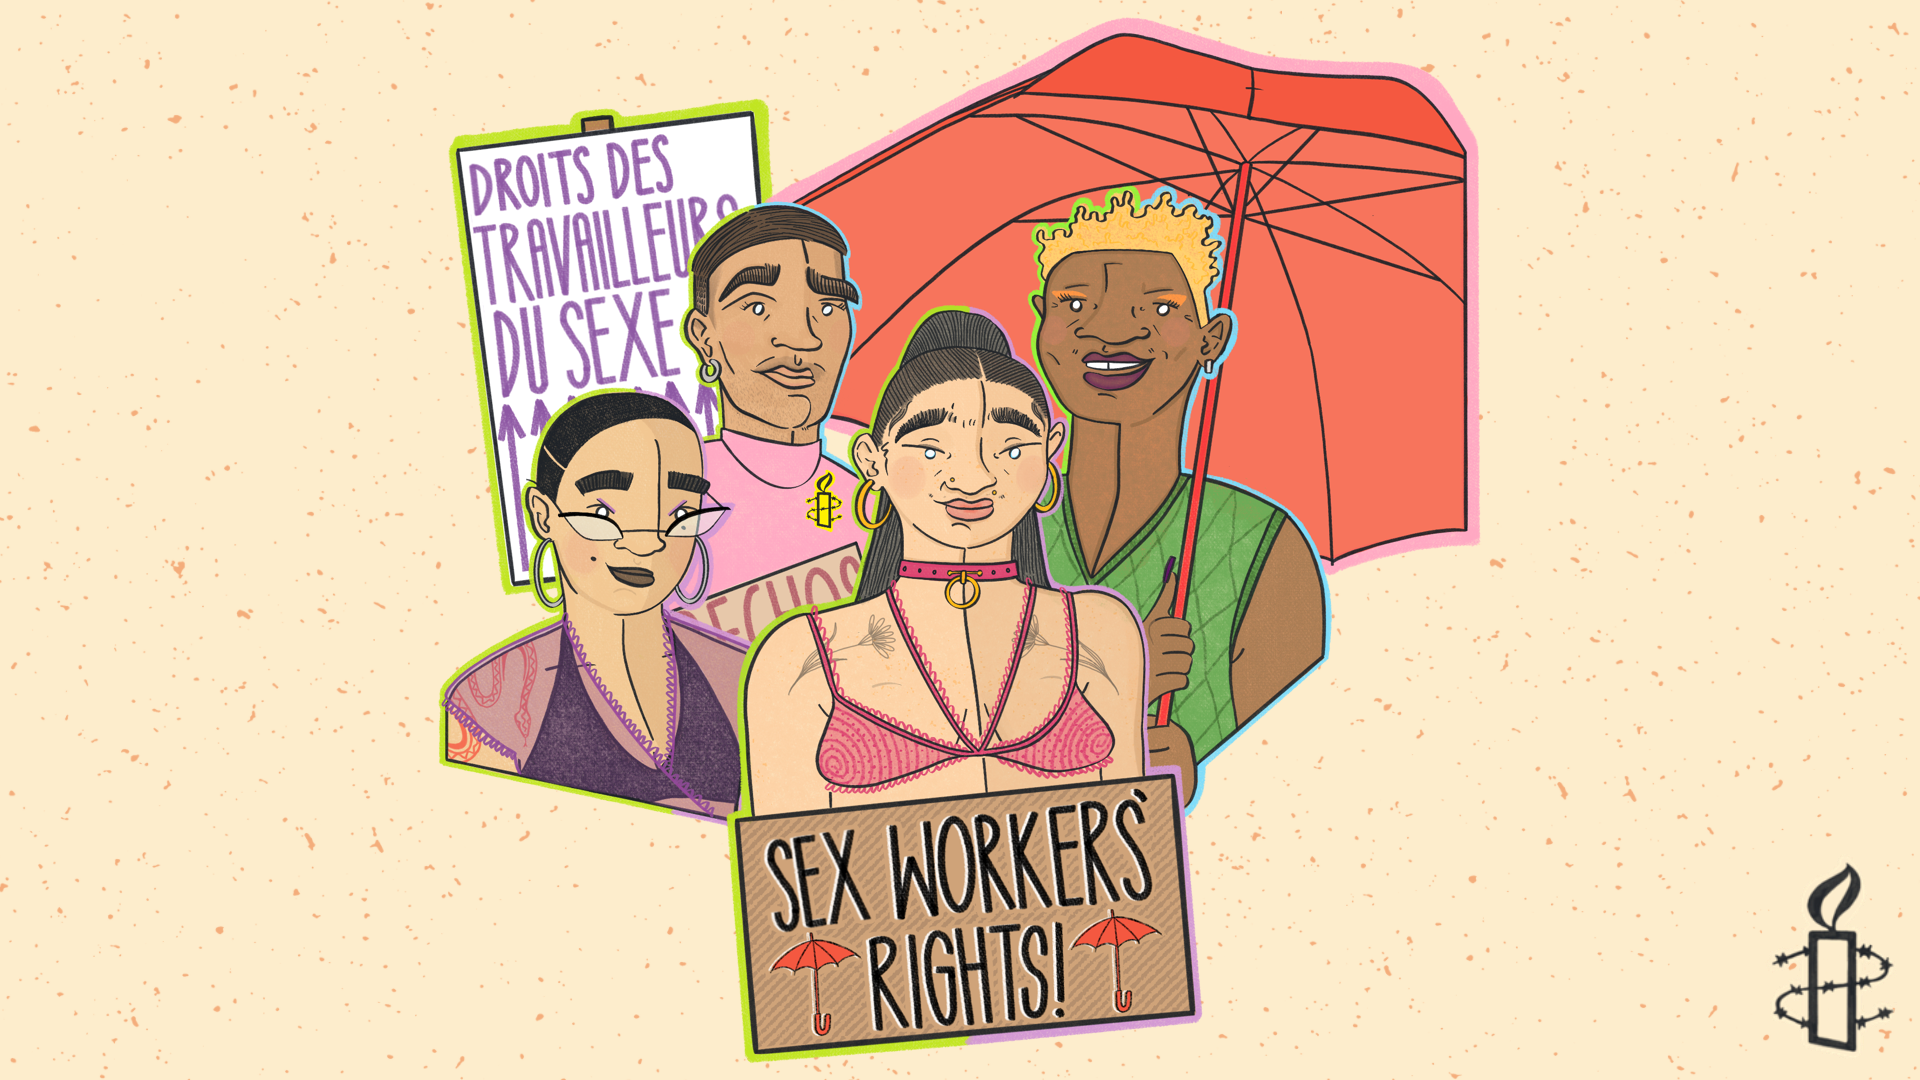 Ireland Laws criminalizing sex work are facilitating the targeting and abuse of sex workers